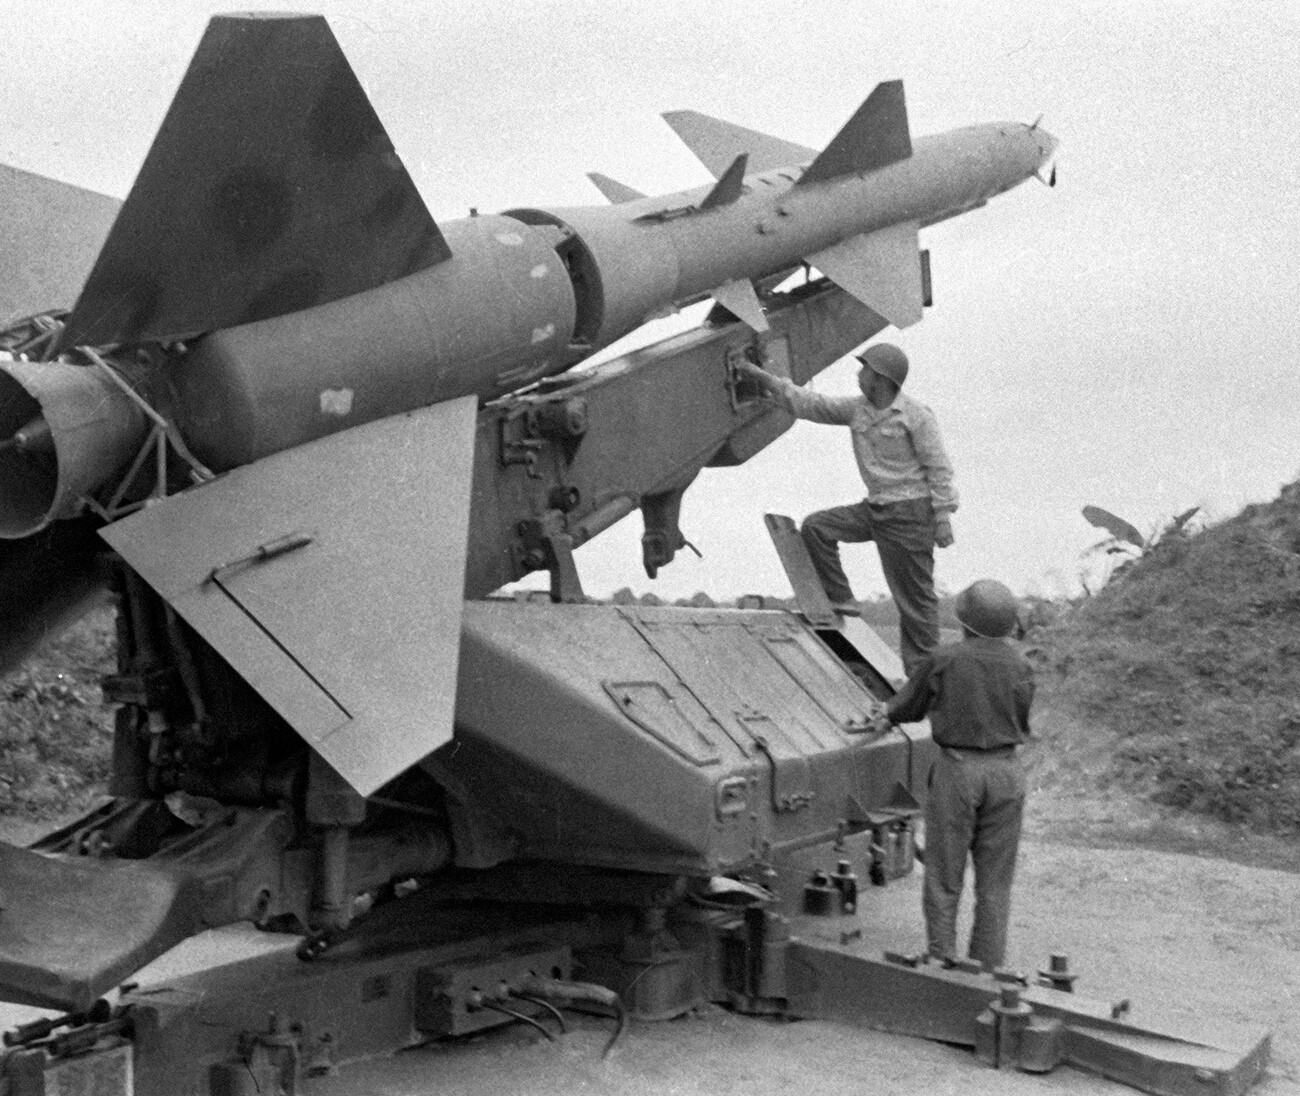 Vietnamese missilemen arming the Soviet Surface-to-Air missile.